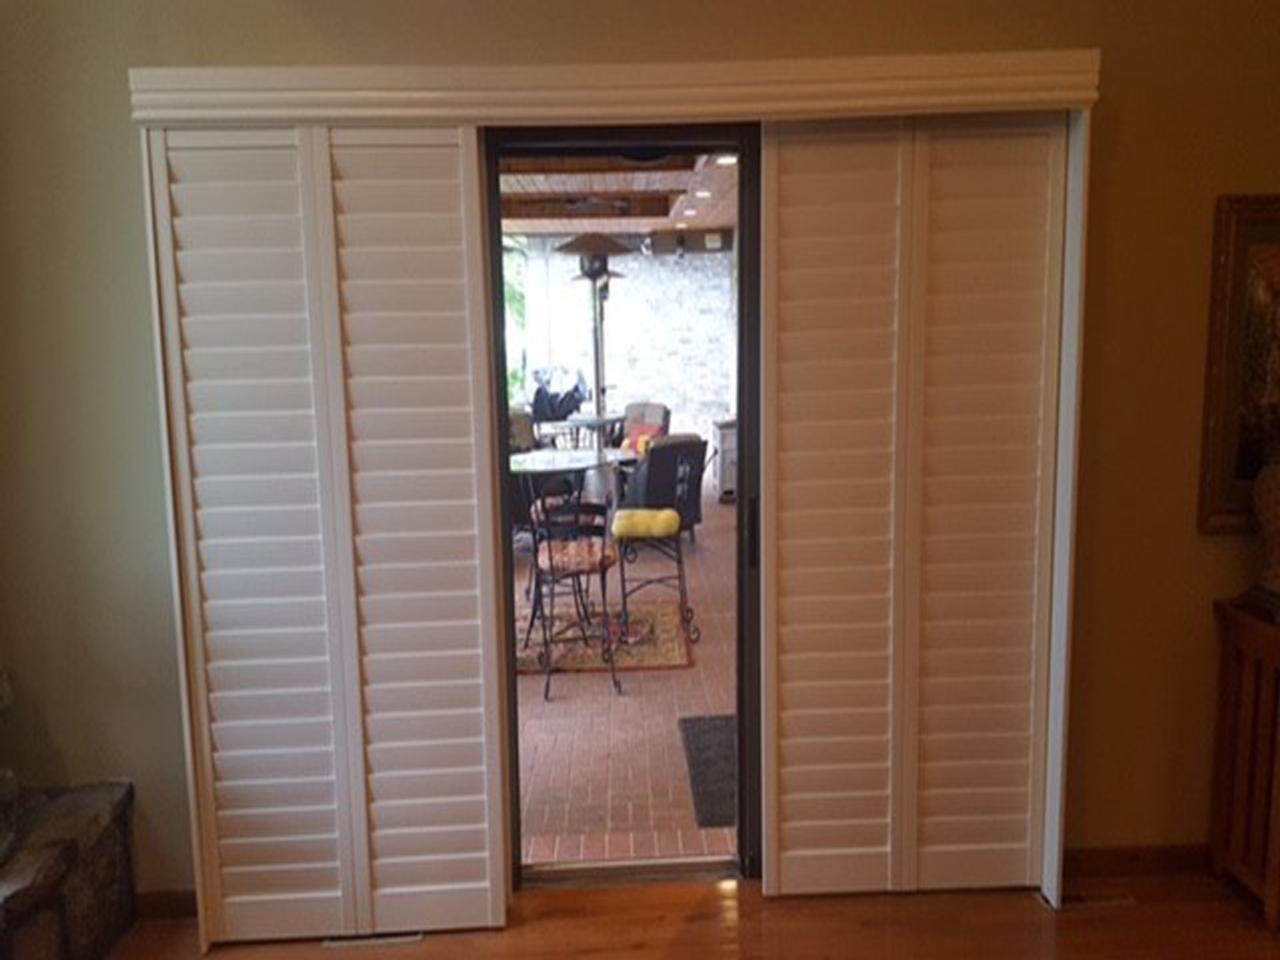 Bypass interior shutters with doors pulled to the sides